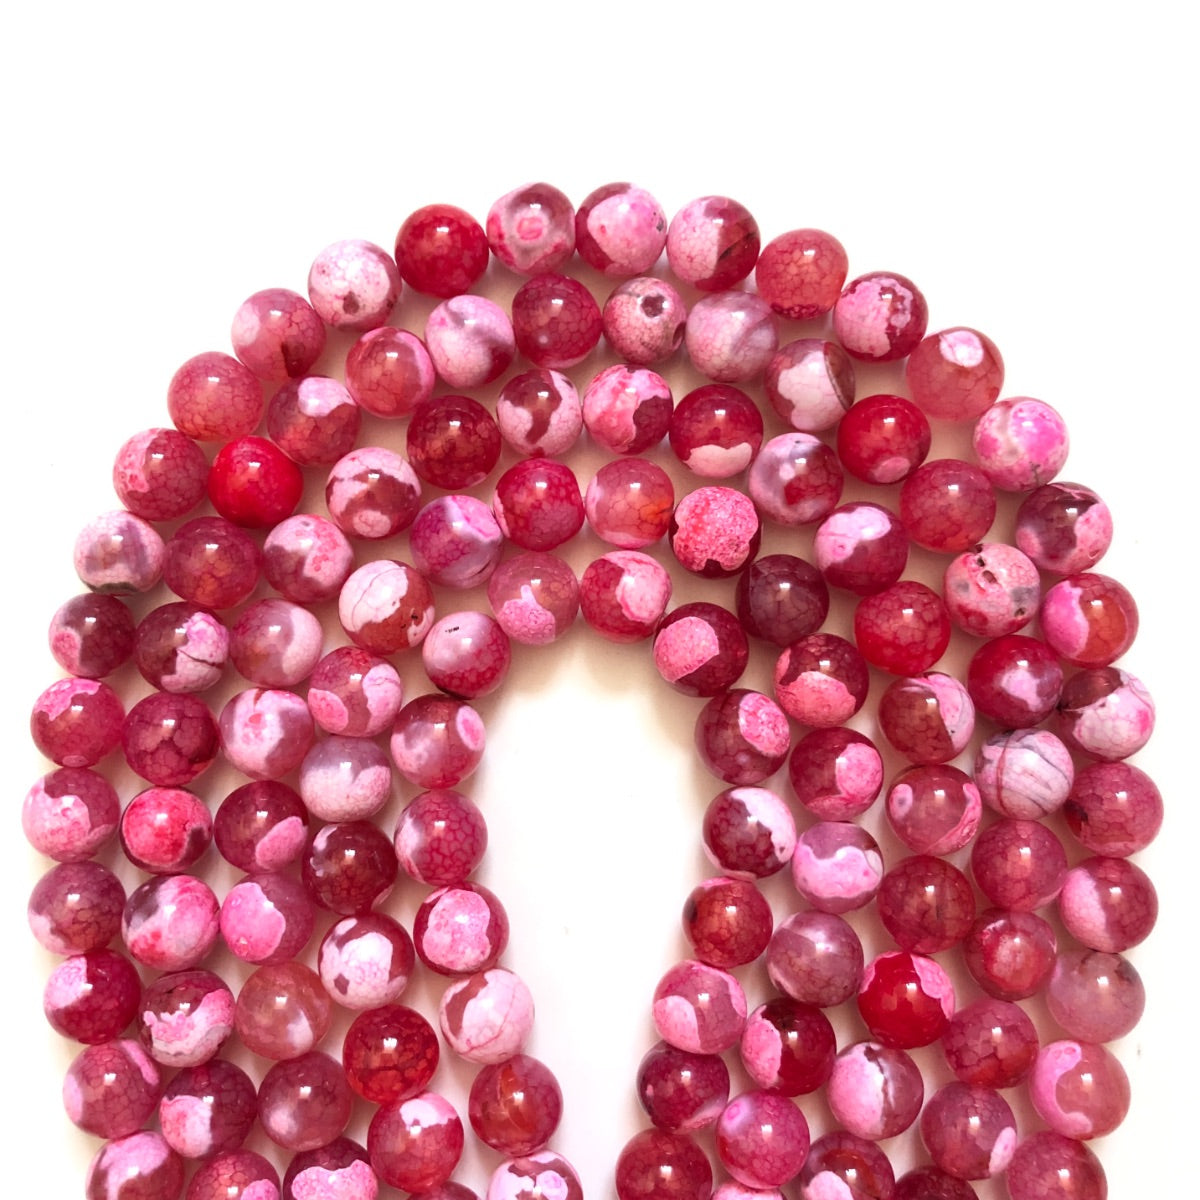 2 Strands/lot 10mm Red Round Fire Agate Stone Beads Stone Beads New Beads Arrivals Round Agate Beads Charms Beads Beyond